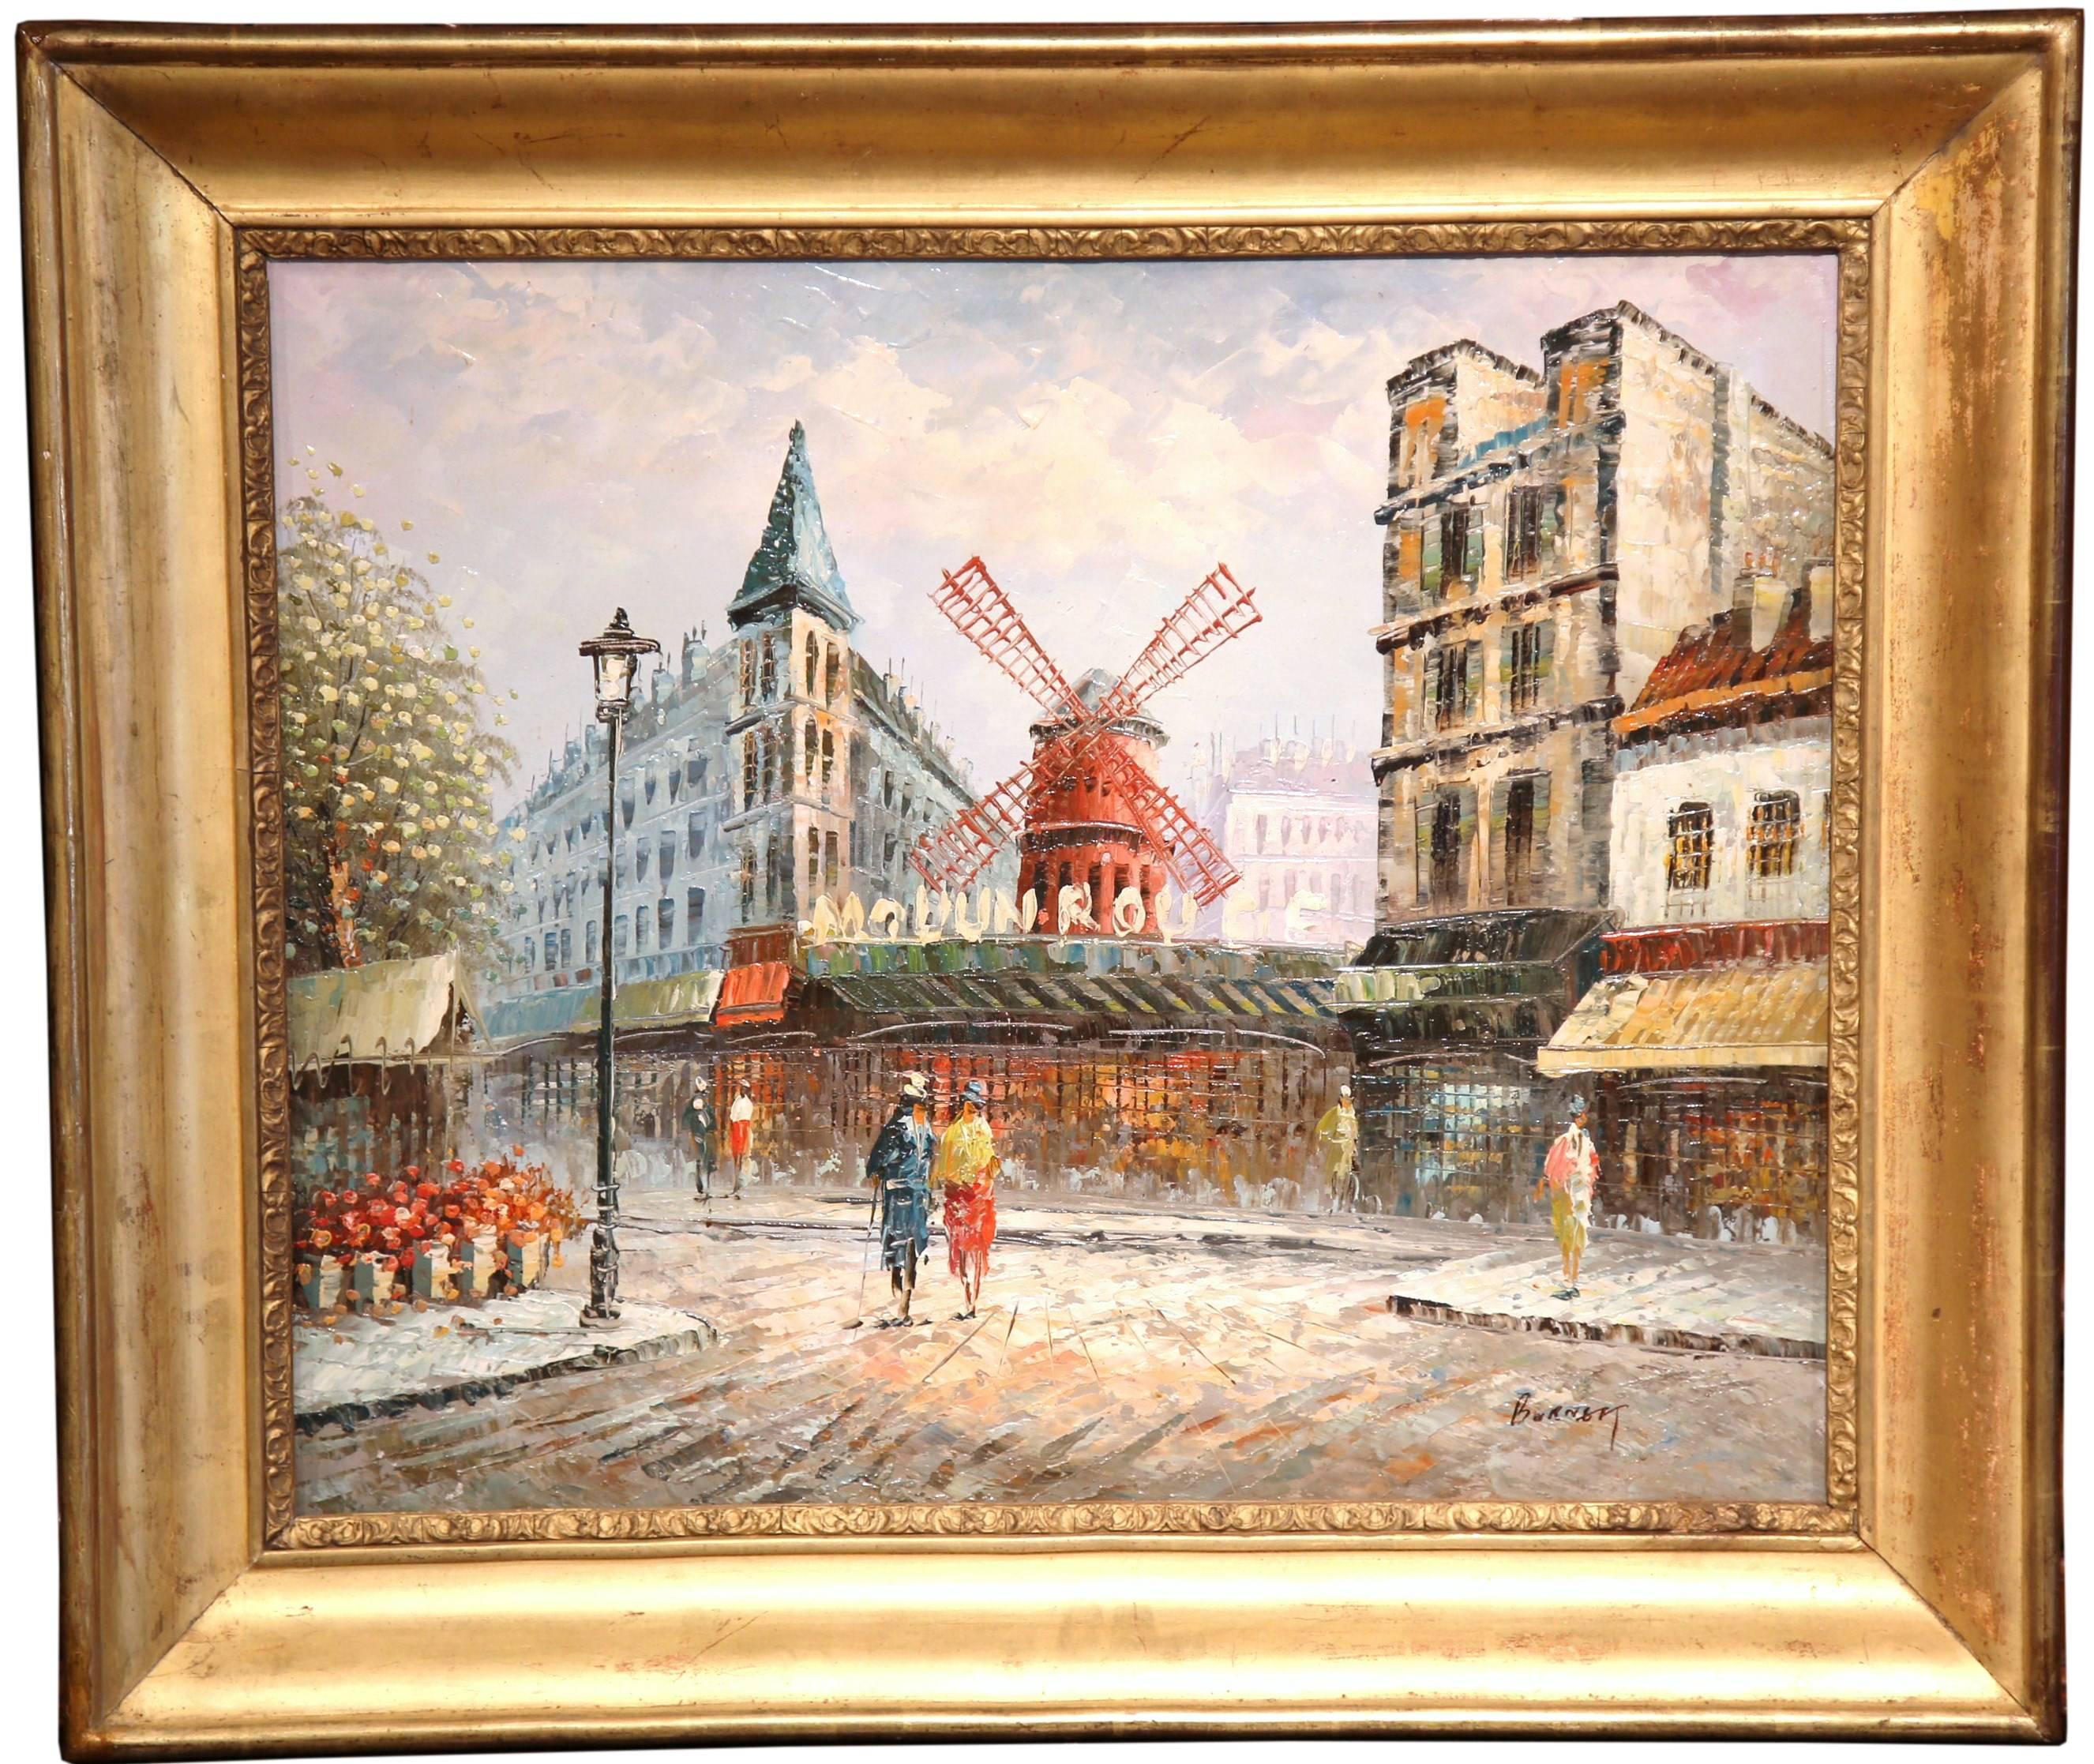 This beautiful oil on canvas painting depicts the iconic Moulin Rouge building in Paris. The classic cityscape composition, signed on the bottom right Burnau, is set in an 19th century gold leaf frame. The painting shows two figures, but is focused